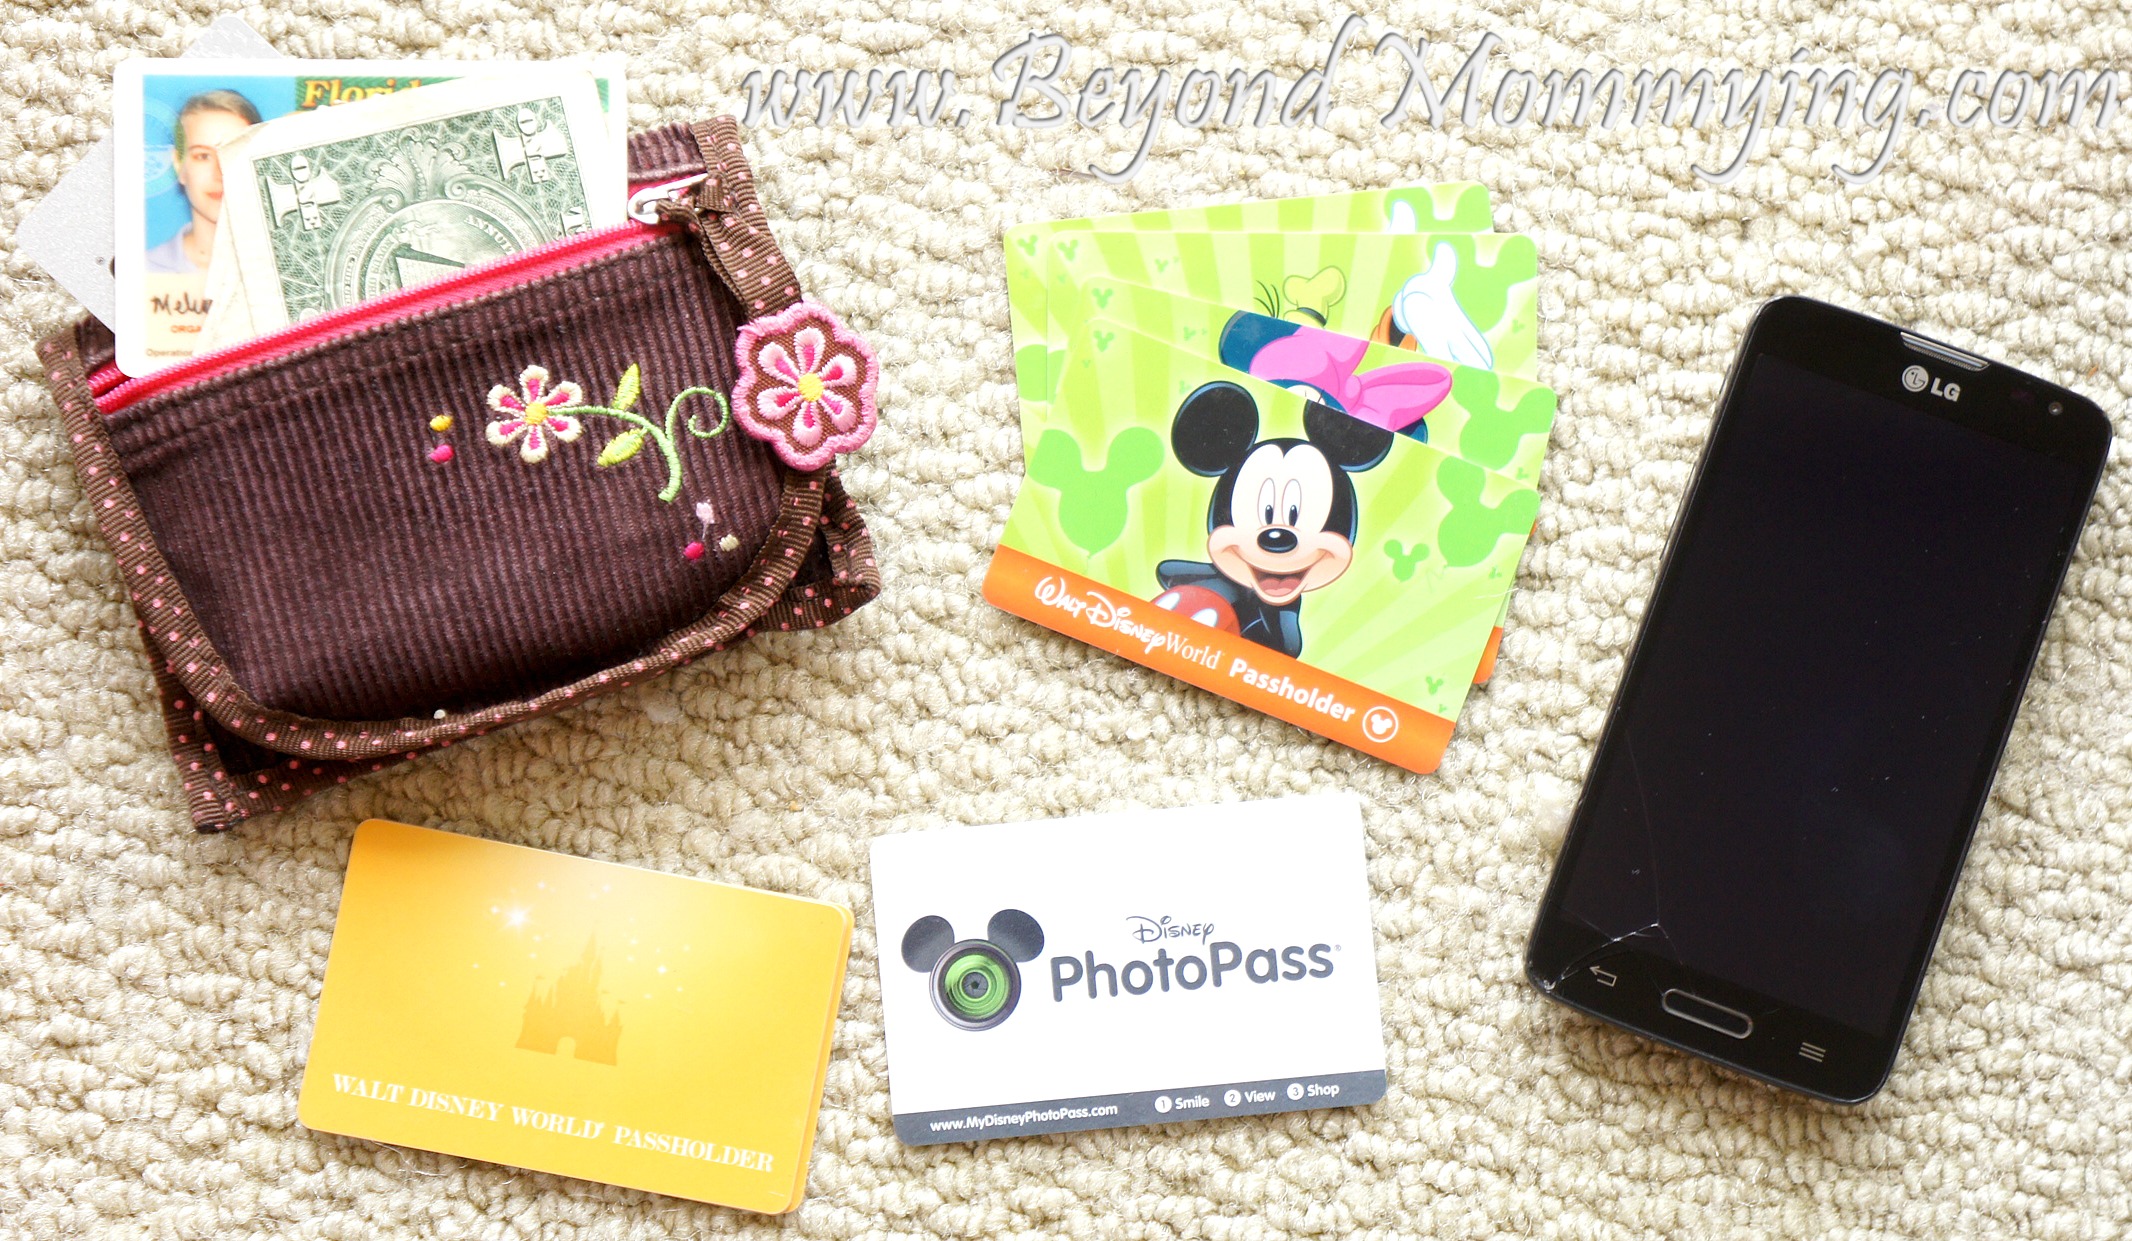 Leave the purse at home, use a small wallet at Disney instead.